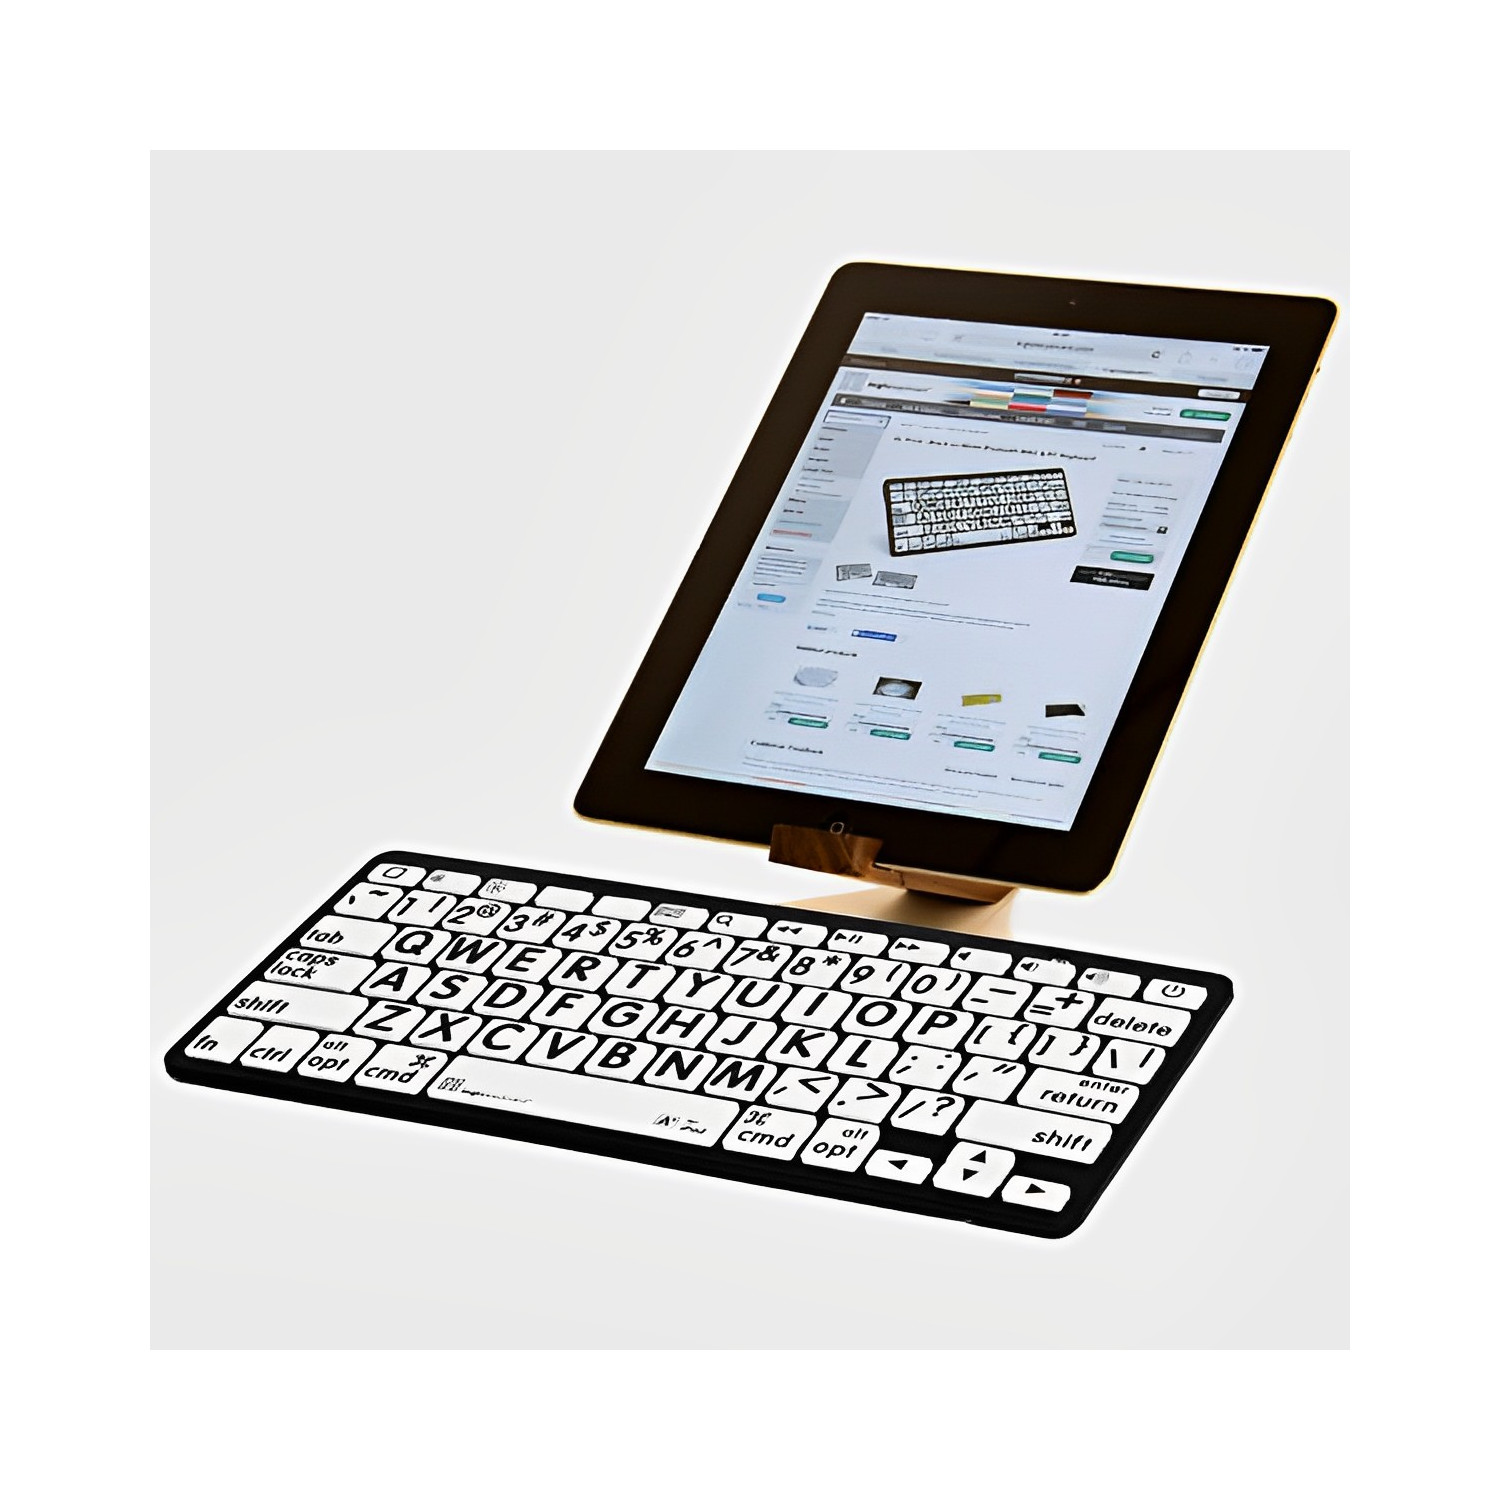 Mini clavier Bluetooth grosses touches compatible avec Android, PC